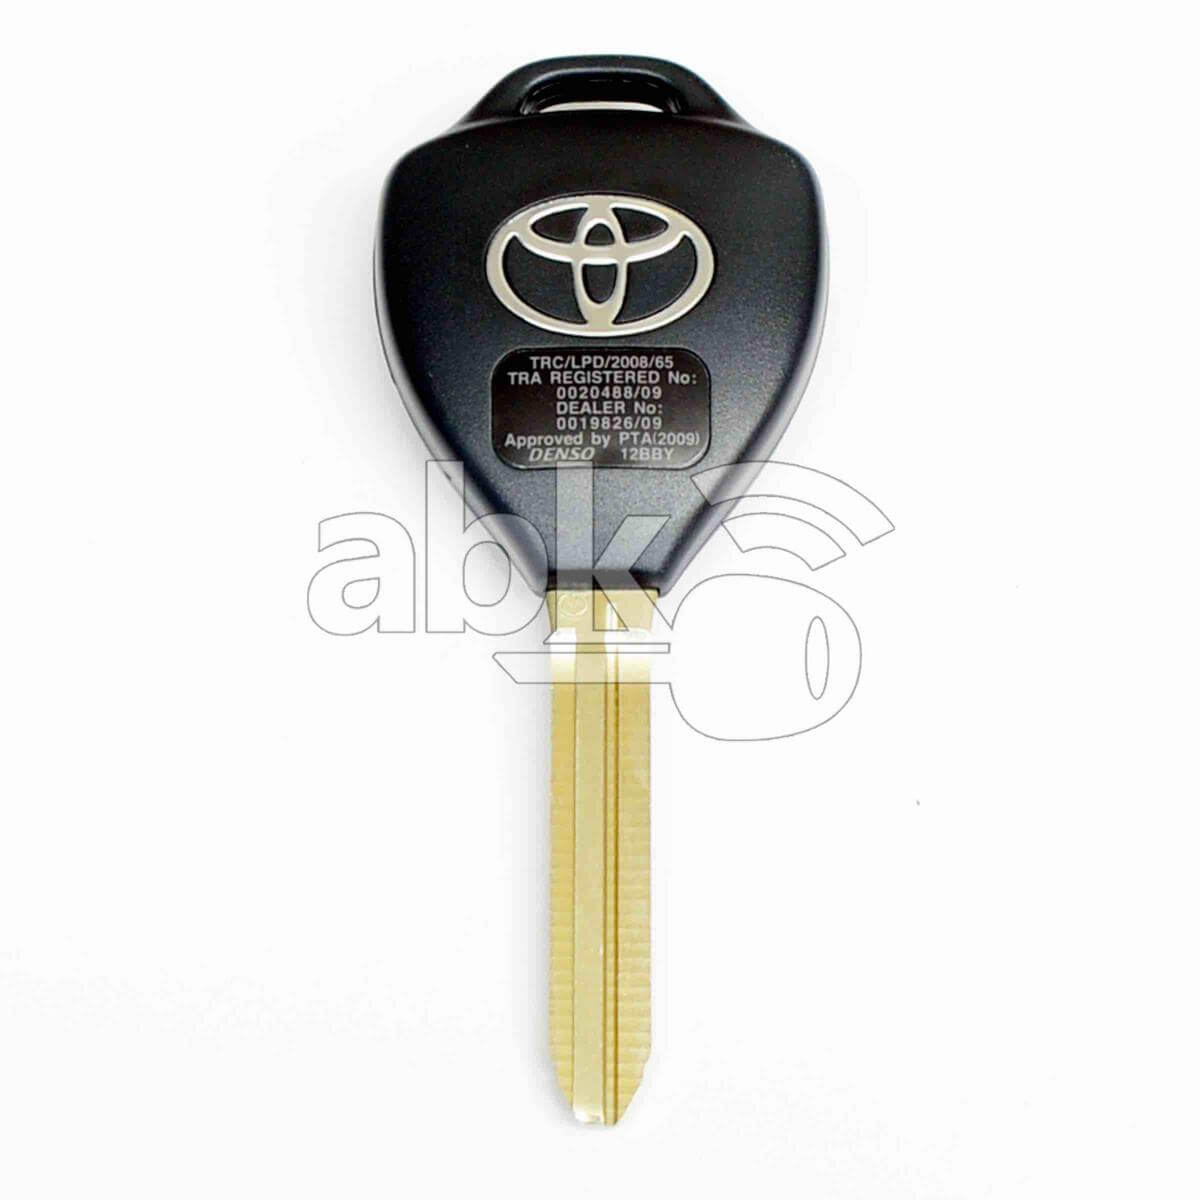 Genuine Toyota Camry Aurion 2012+ Key Head Remote 4Buttons 12BBY 433MHz TOY43 89070-06460 - ABK-3393